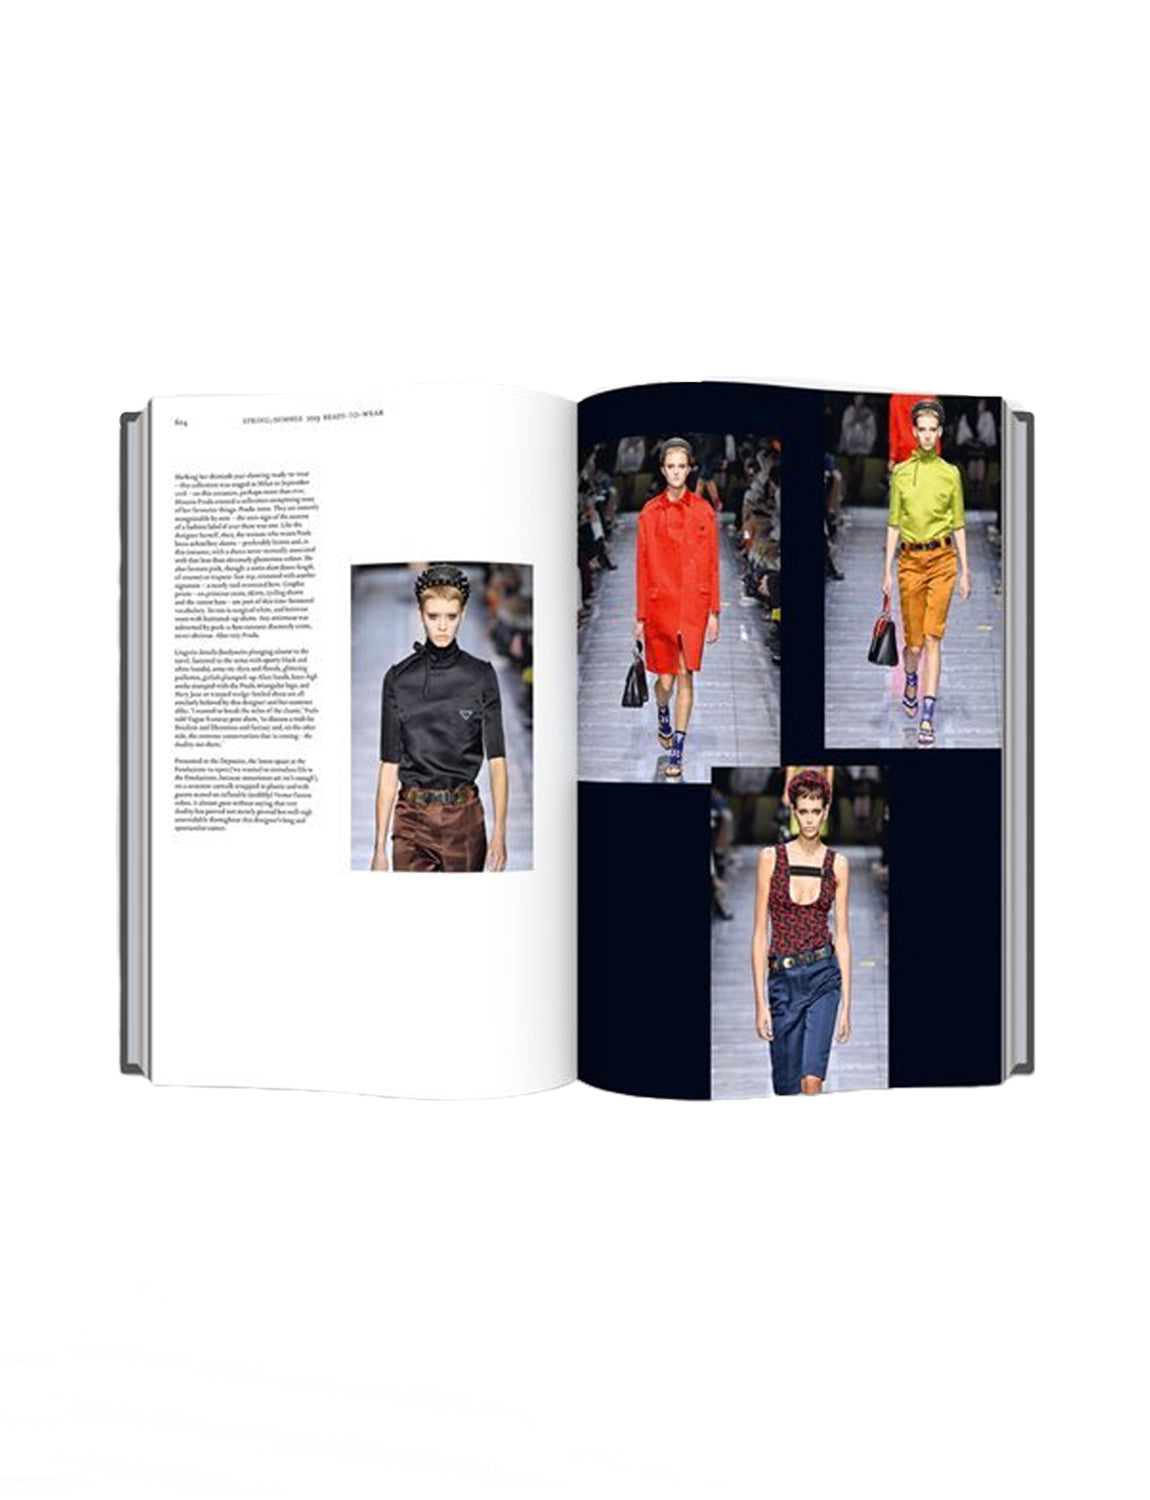 Prada Catwalk: The Complete Collections by Frankel, Susannah